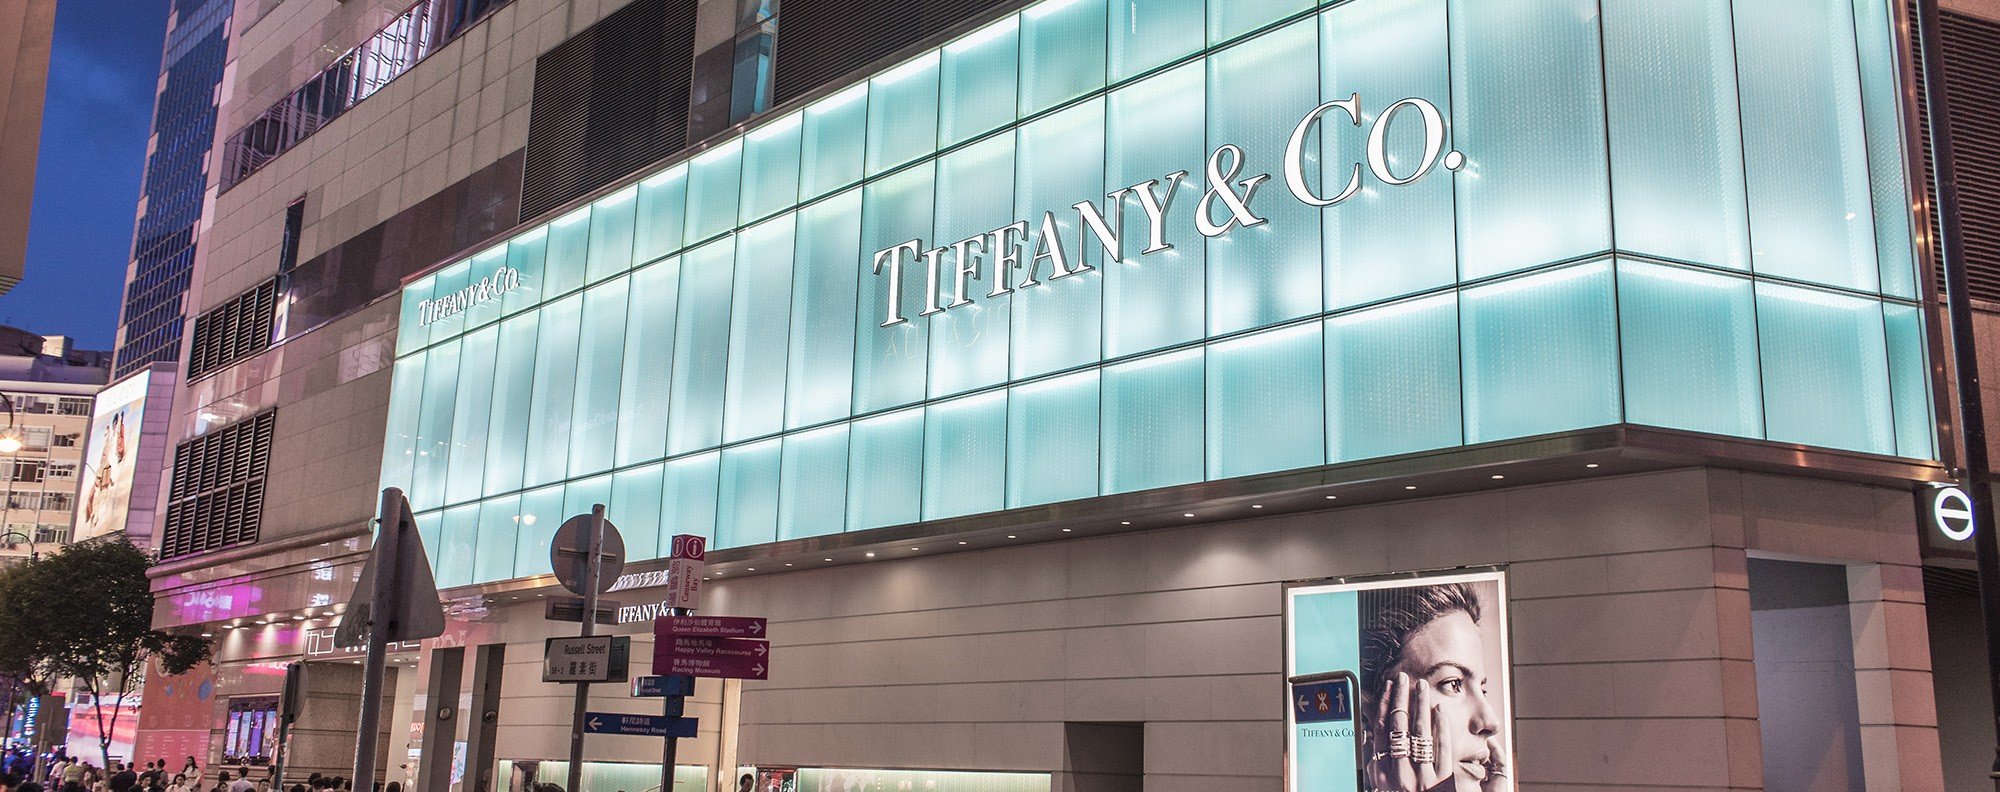 The Tiffany and Co shop in Hong Kong's Times Square. Photo: Shutterstock